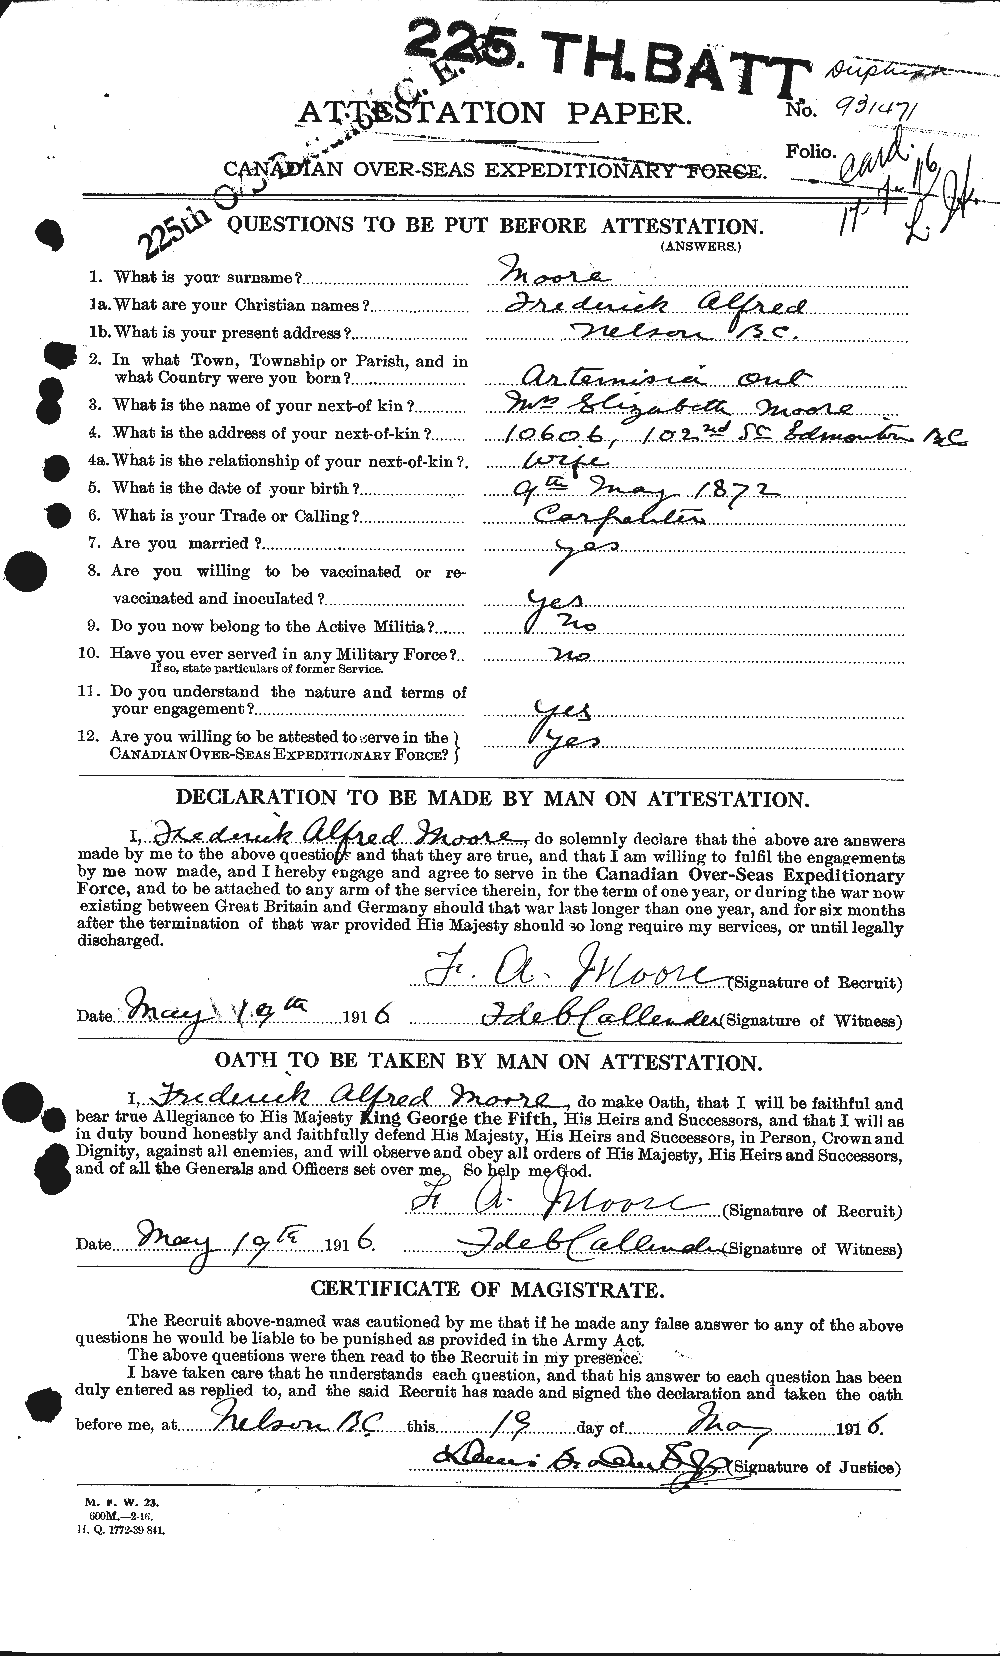 Personnel Records of the First World War - CEF 506739a